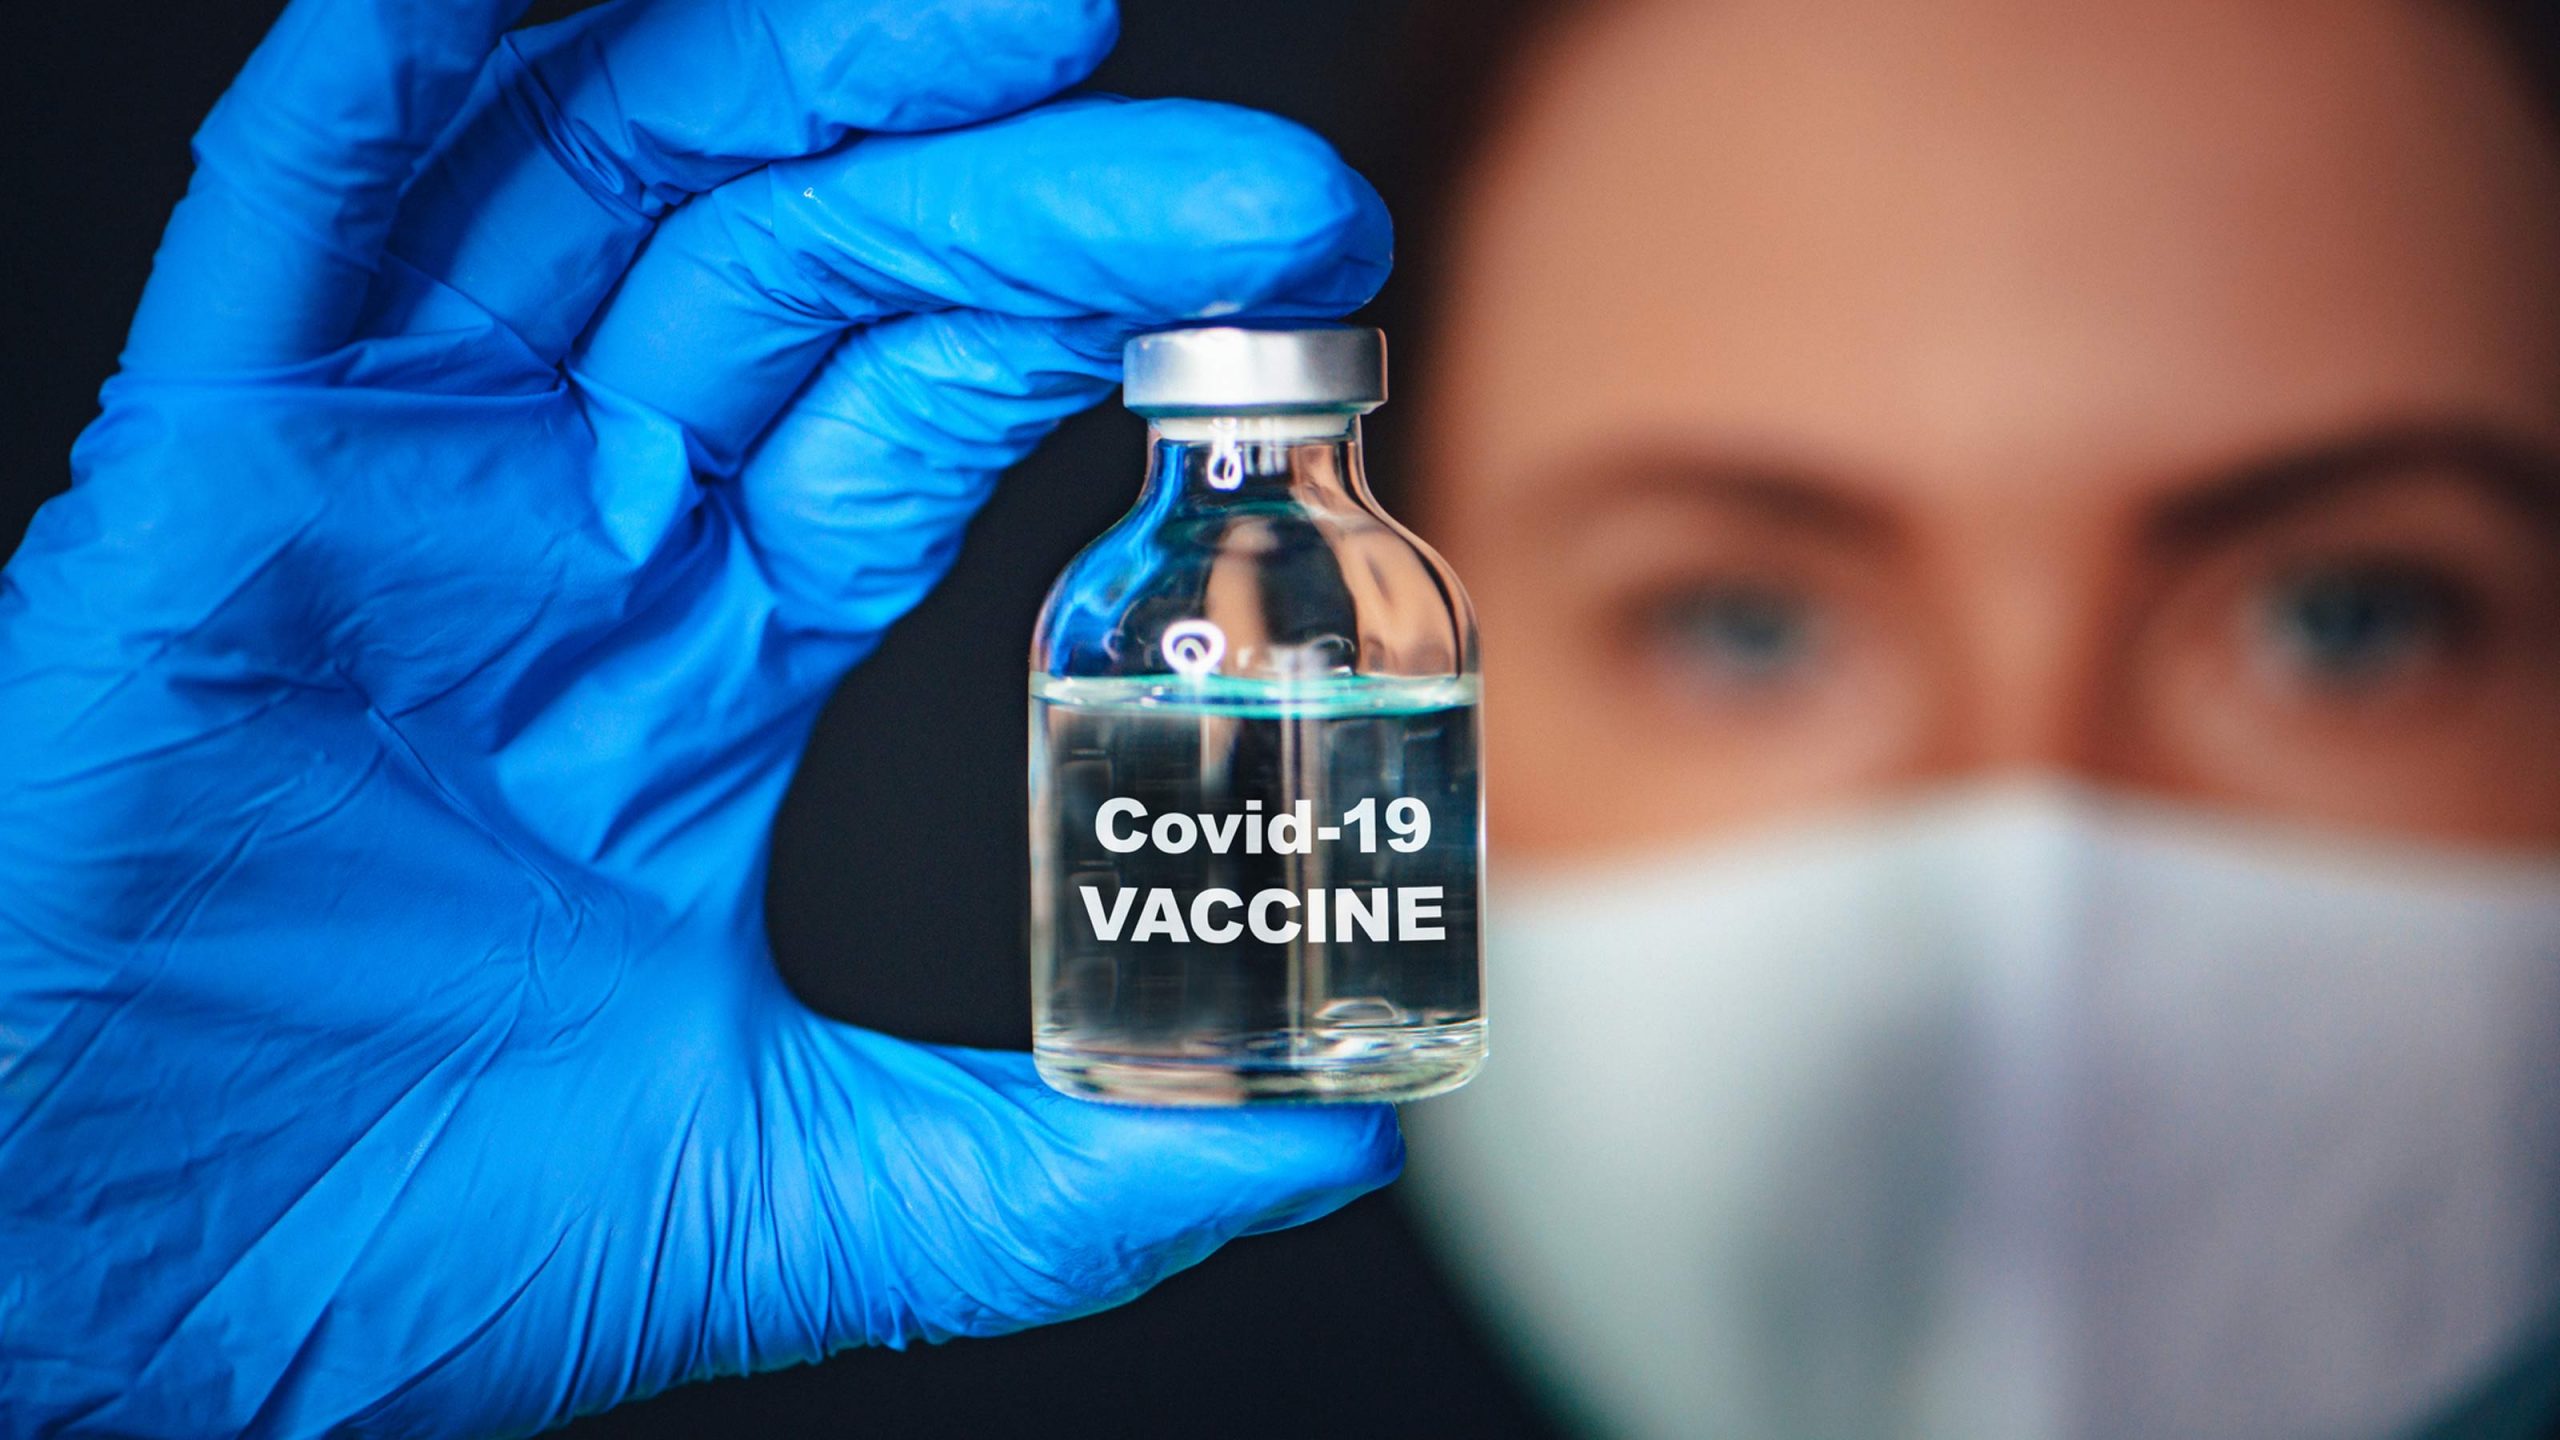 Half of Construction Workers not Comfortable Getting the COVID-19 Vaccine